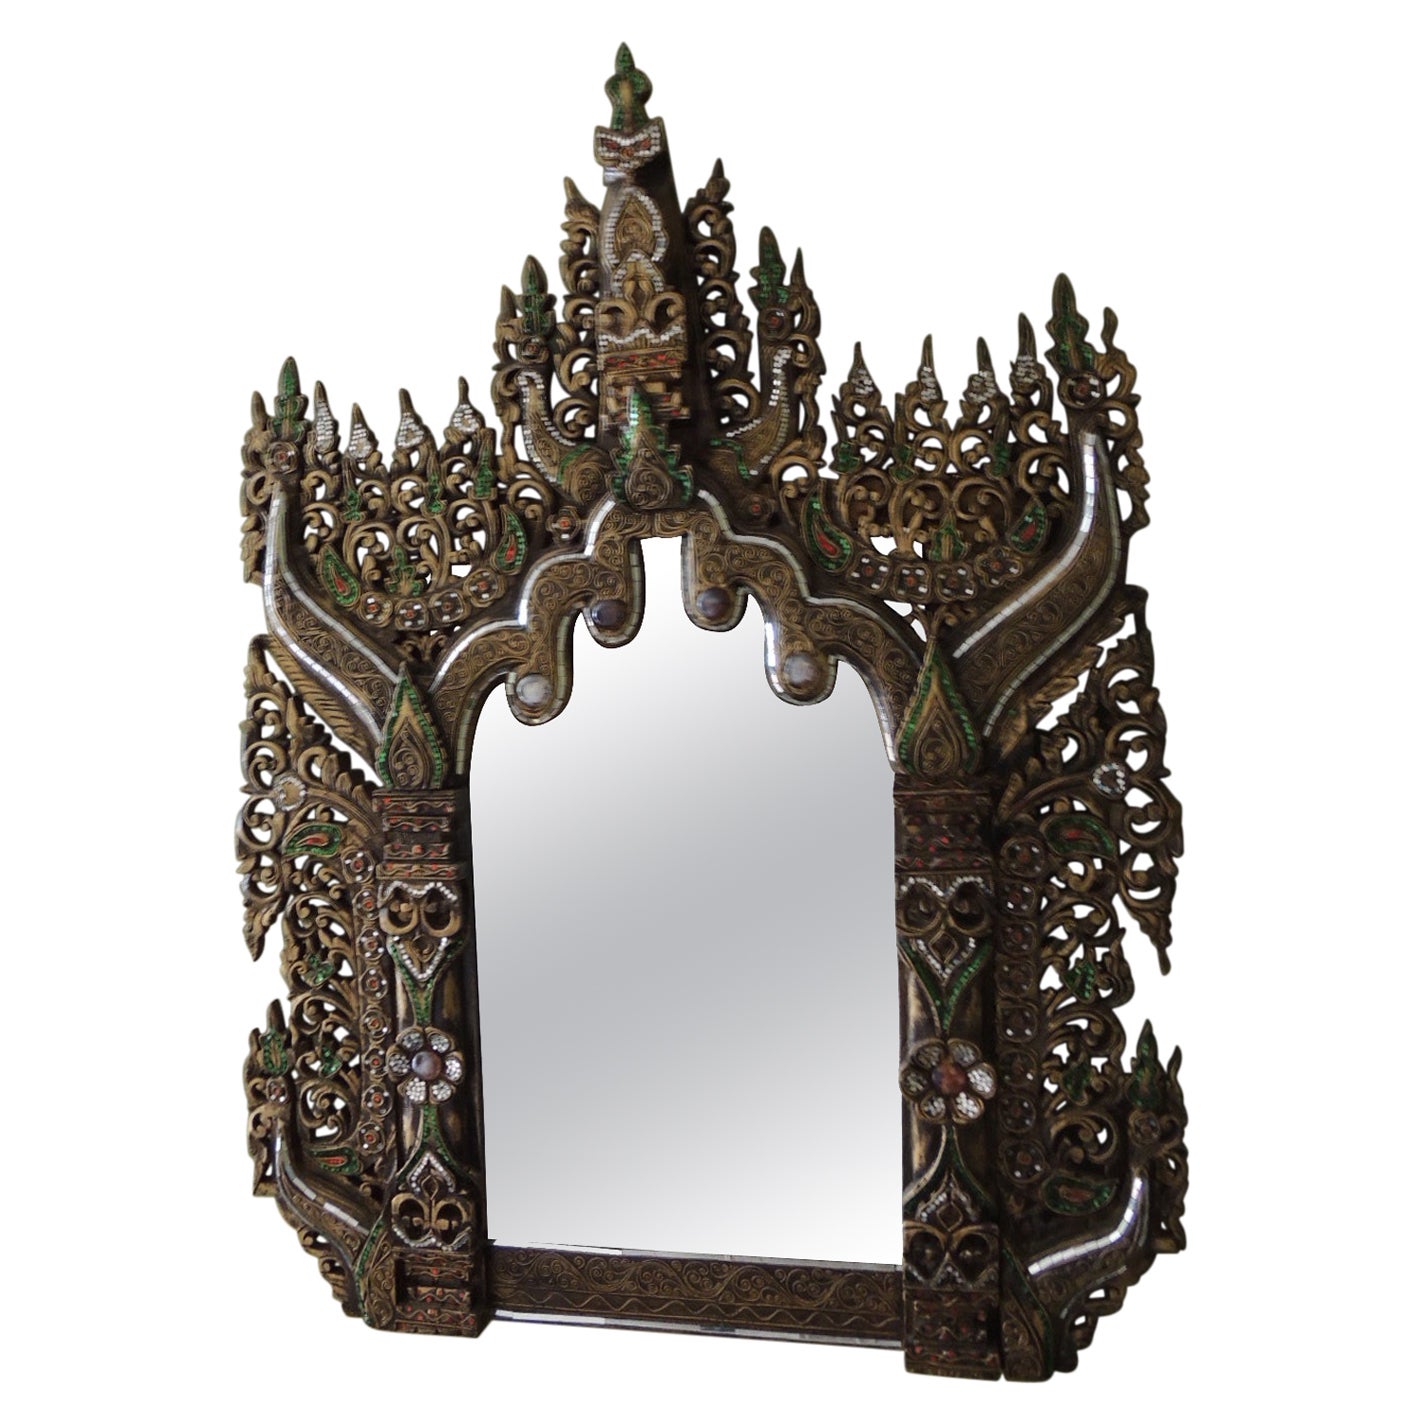 Large Hand-Carved Bejeweled Wood Wall Mirror